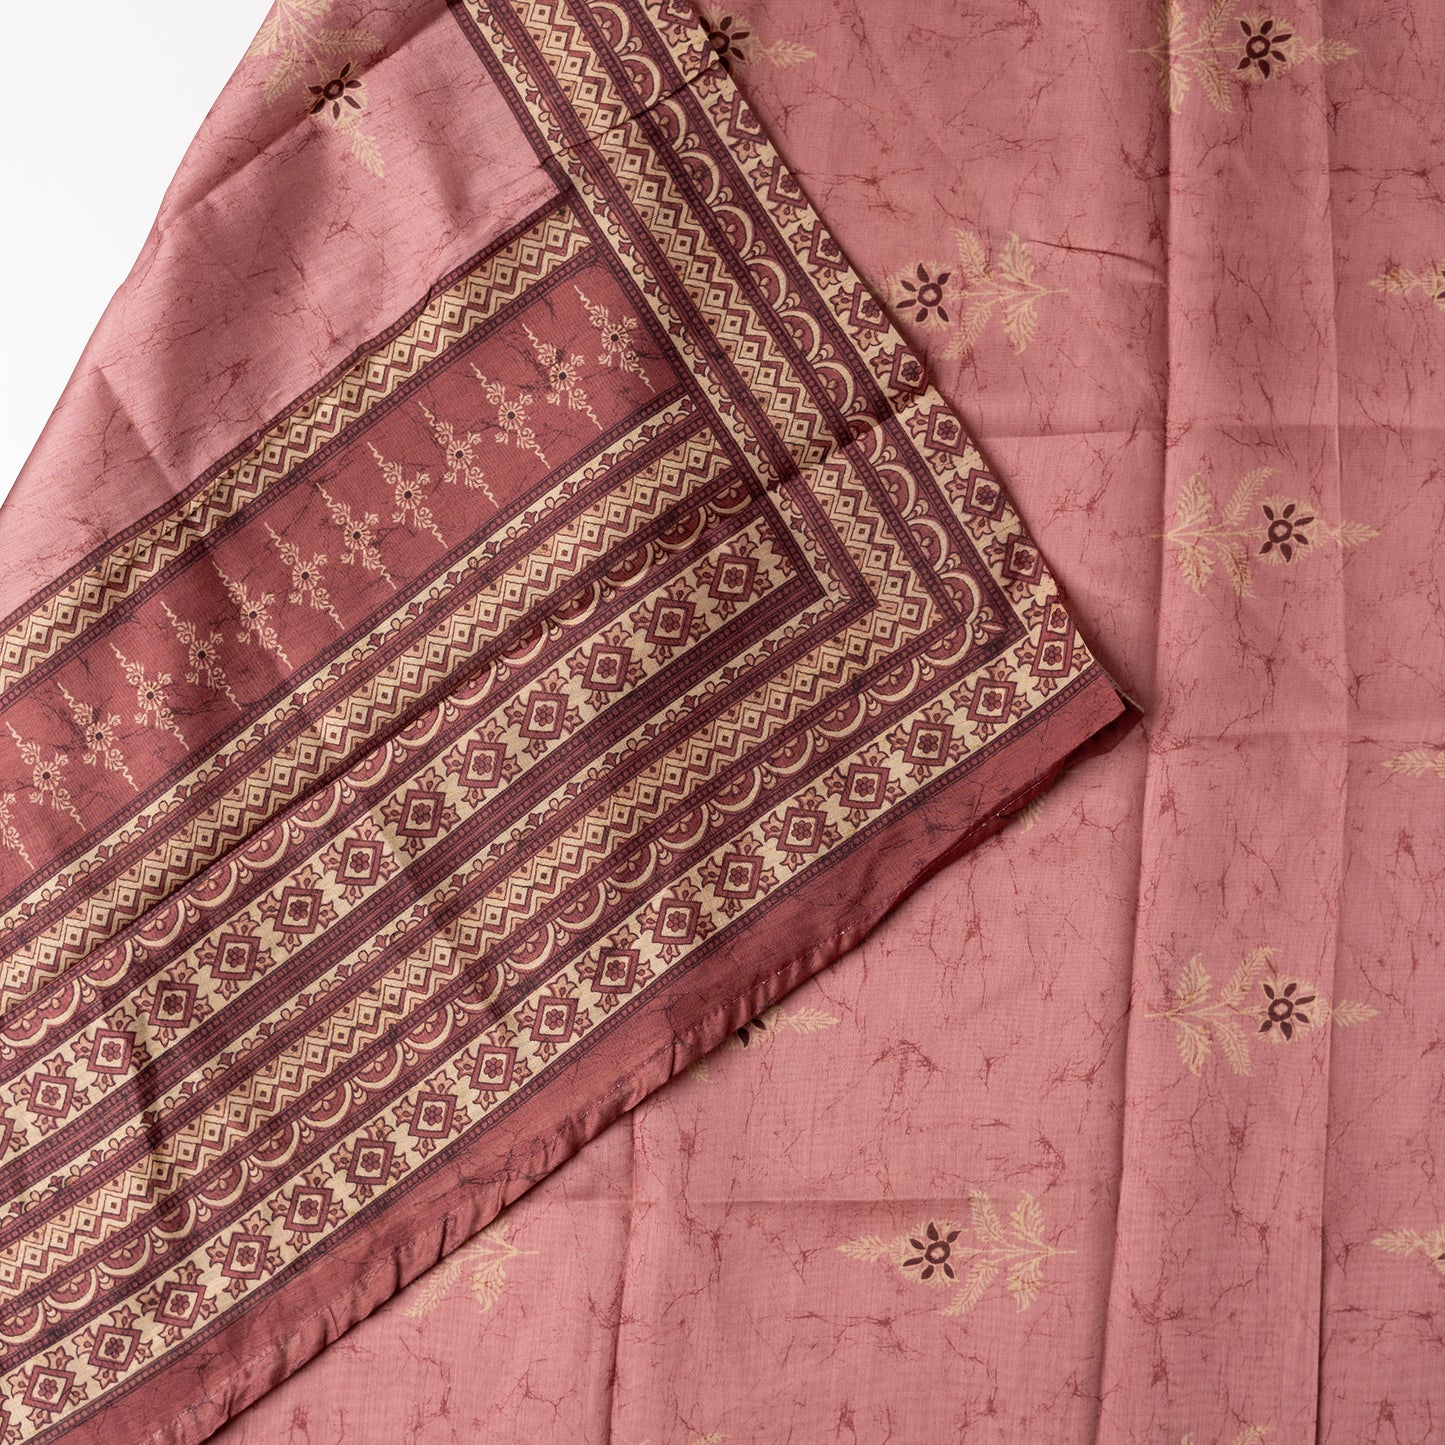 Silk dupatta with beautiful digital prints matching the top light wine color. 